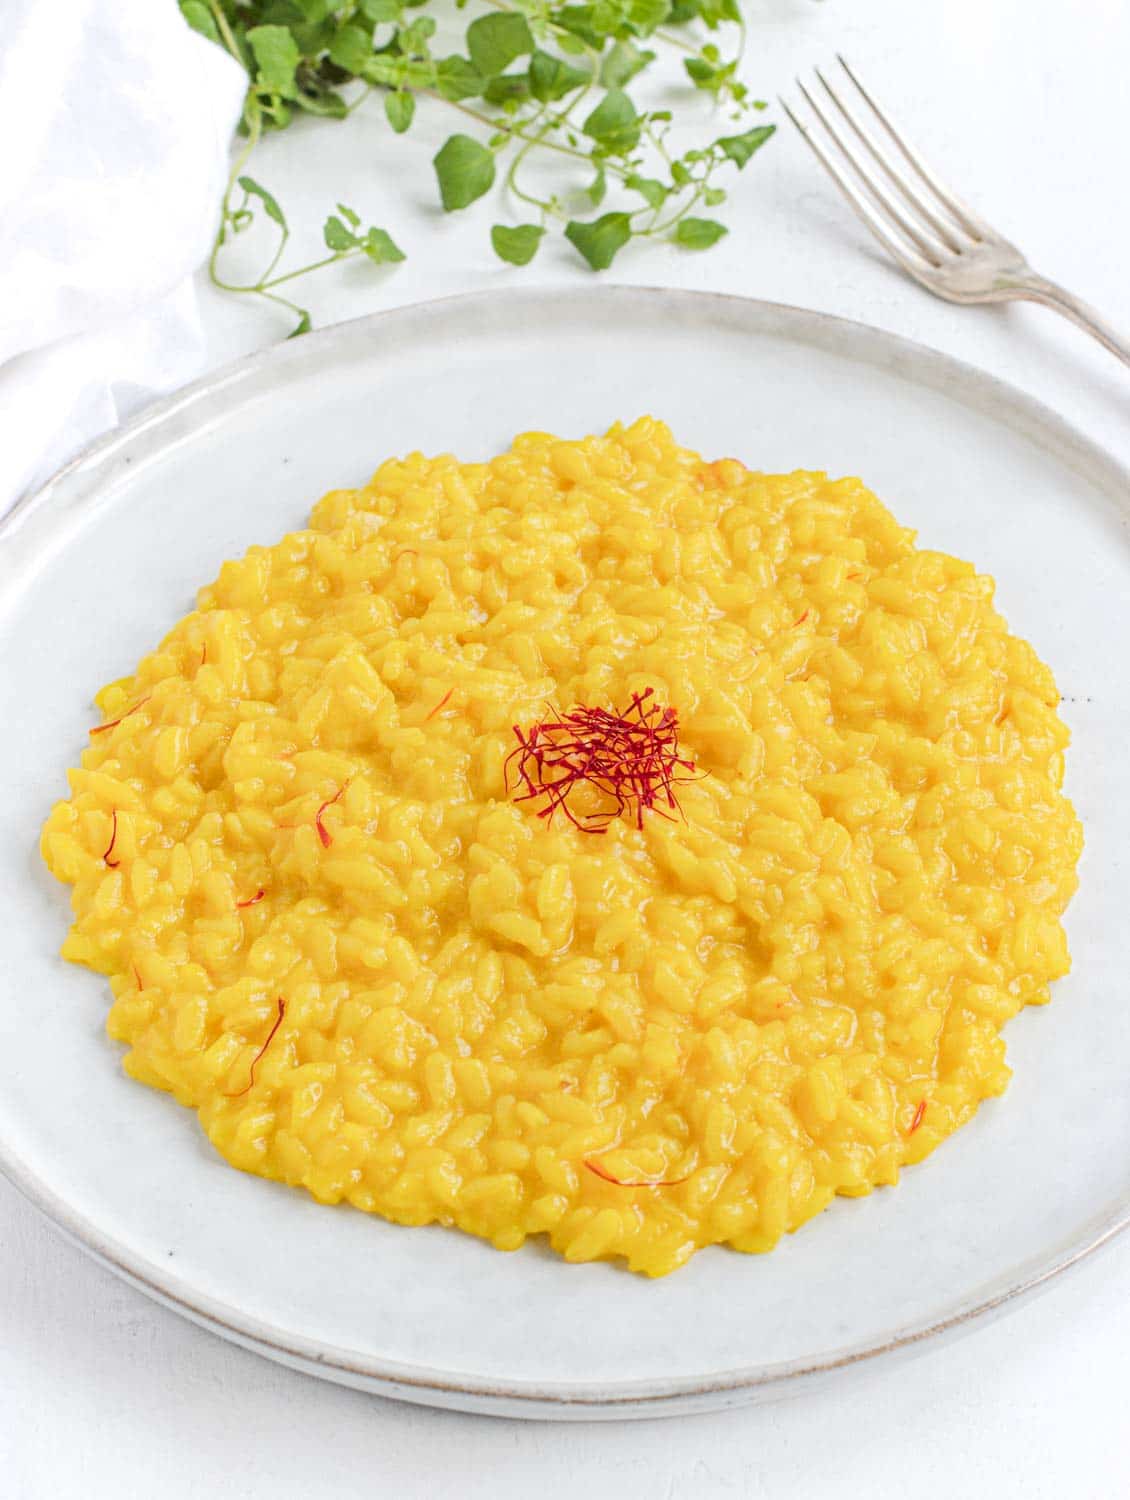 Creamy saffron risotto on a plate ready to be eaten